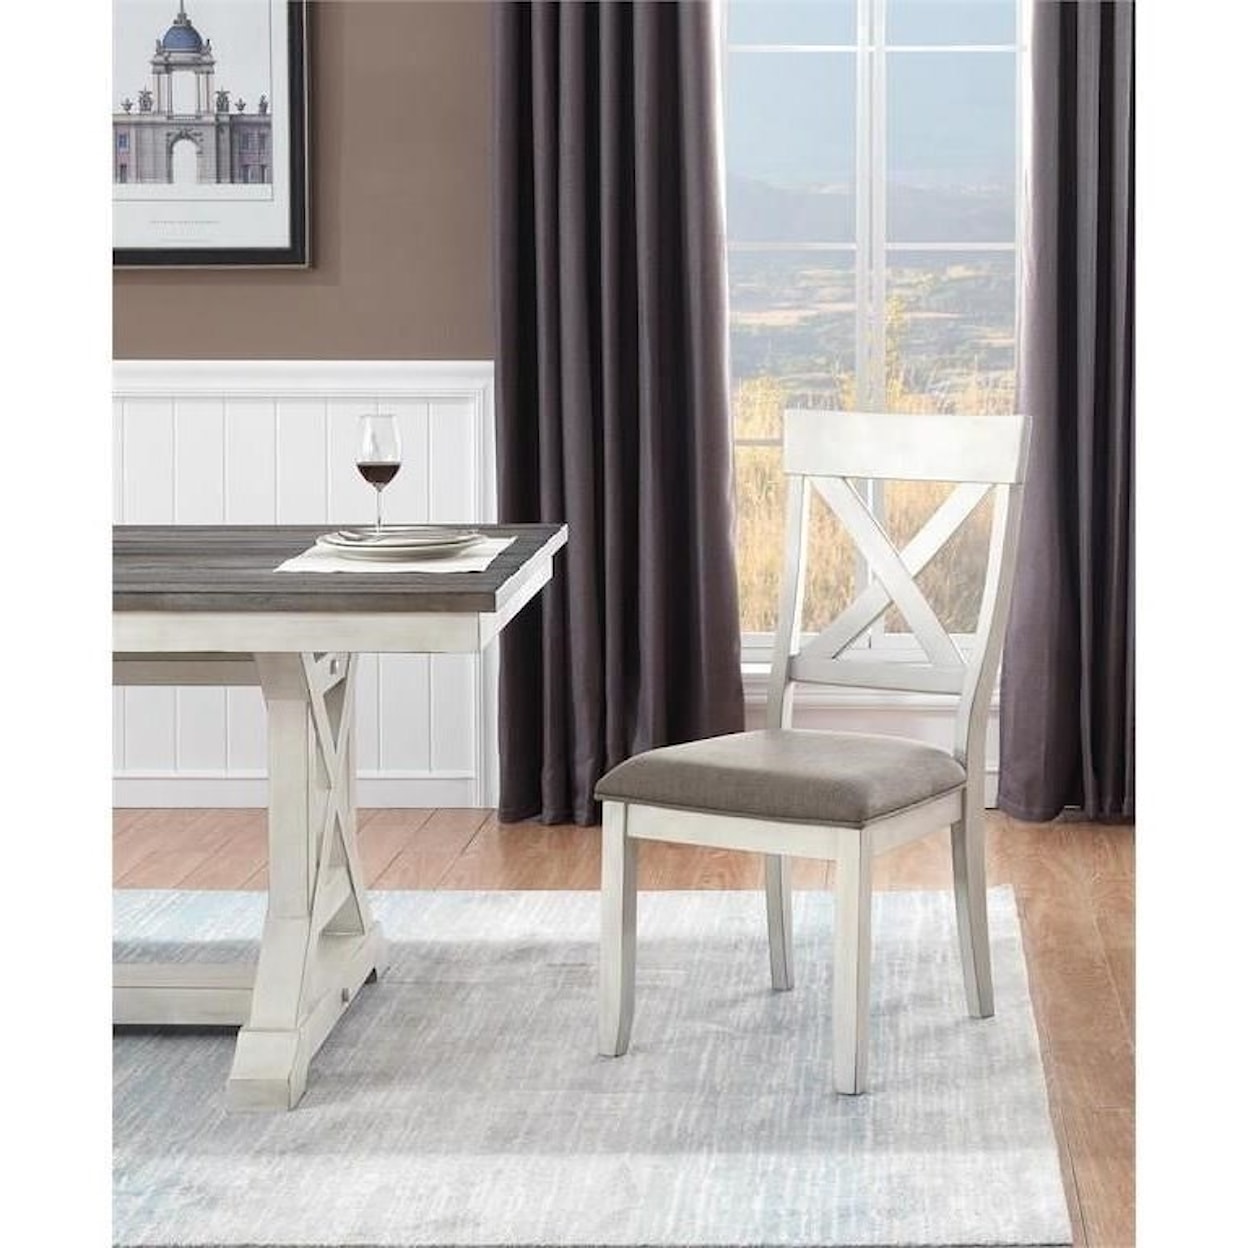 C2C Bar Harbor II Includes TWO Dining Chairs